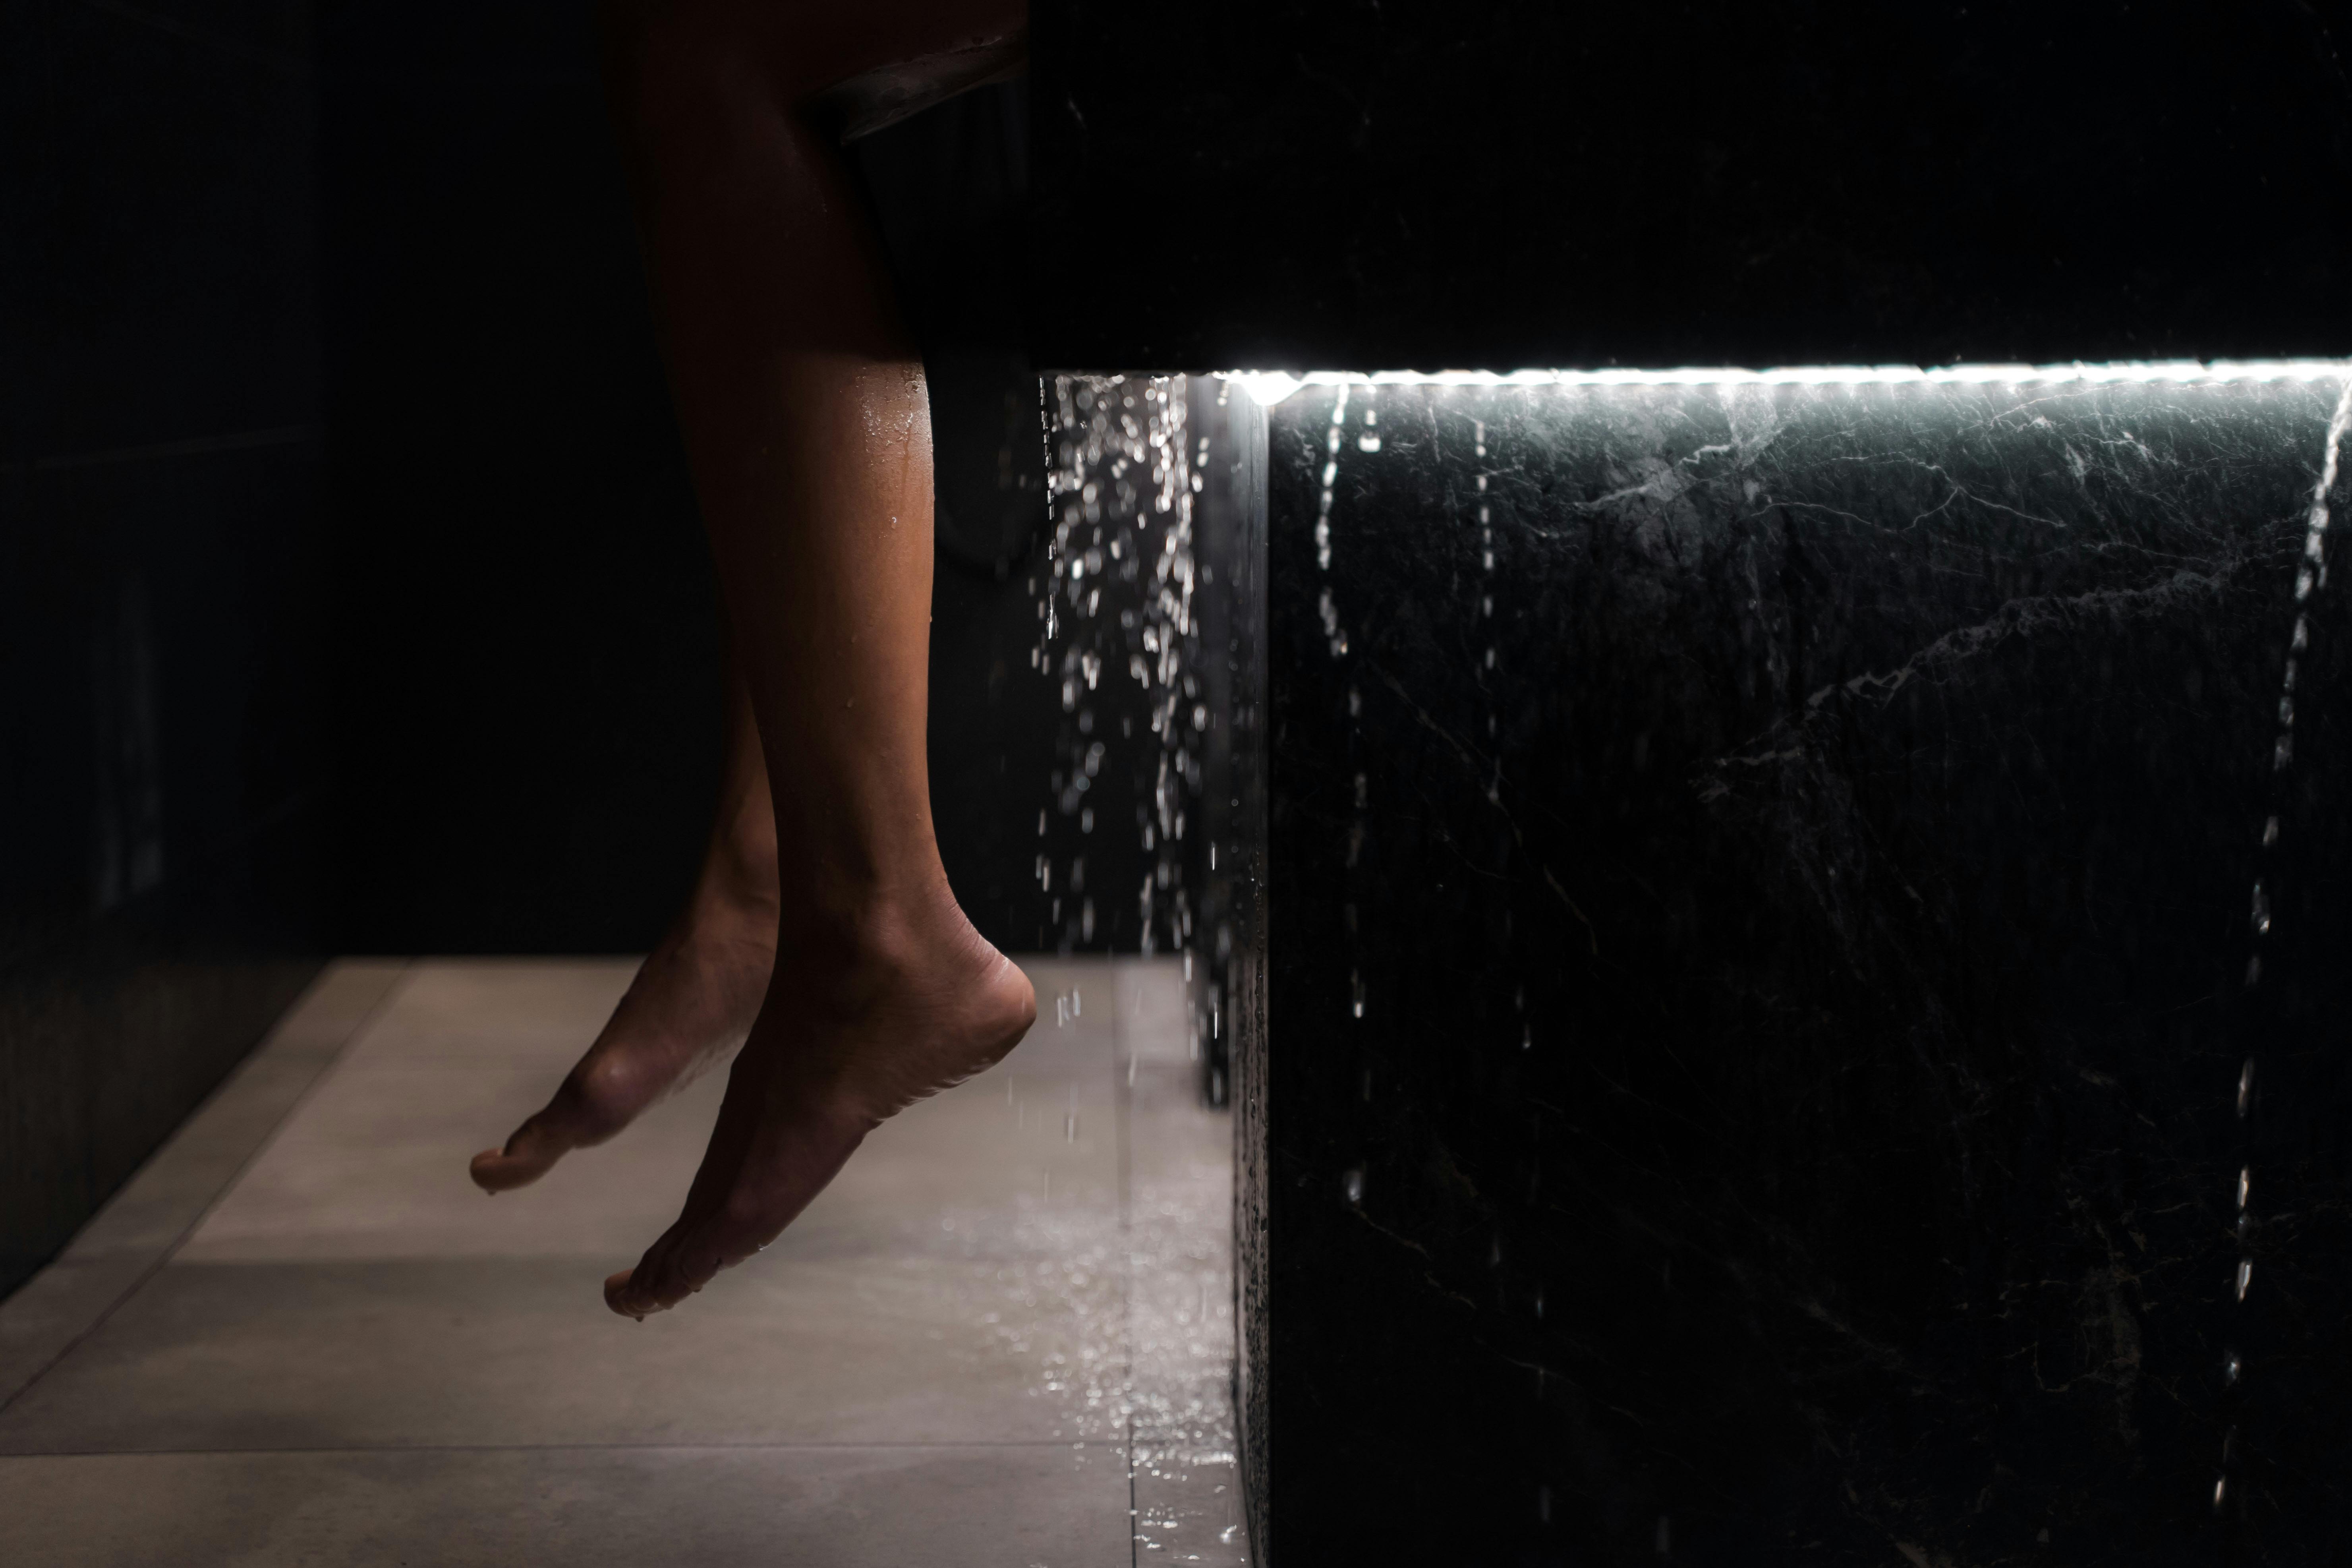 a person s feet near the dripping water